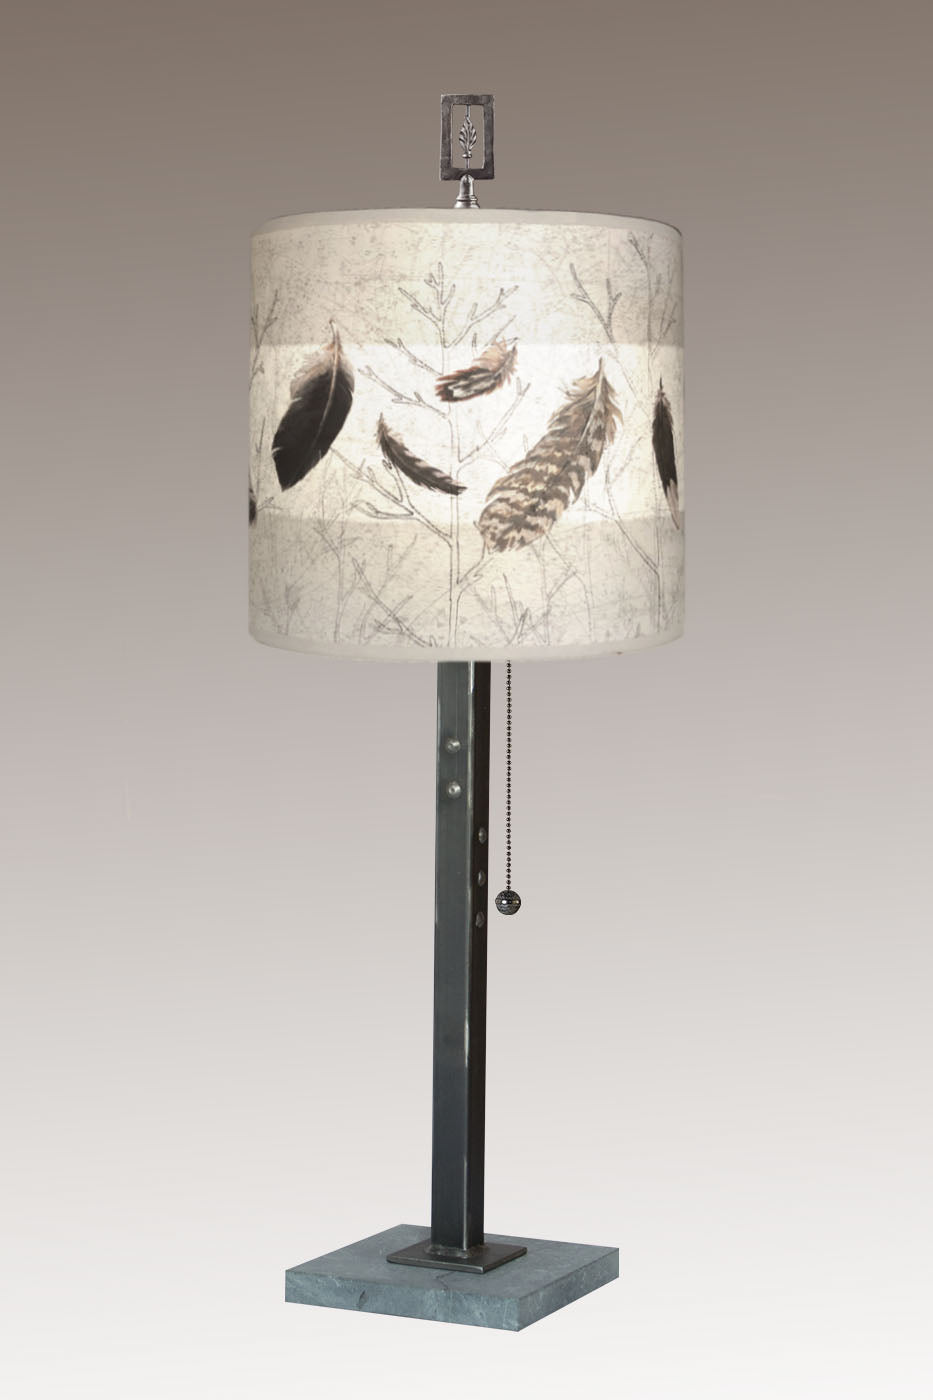 Janna Ugone &amp; Co Table Lamps Steel Table Lamp with Medium Drum Shade in Feathers in Pebble